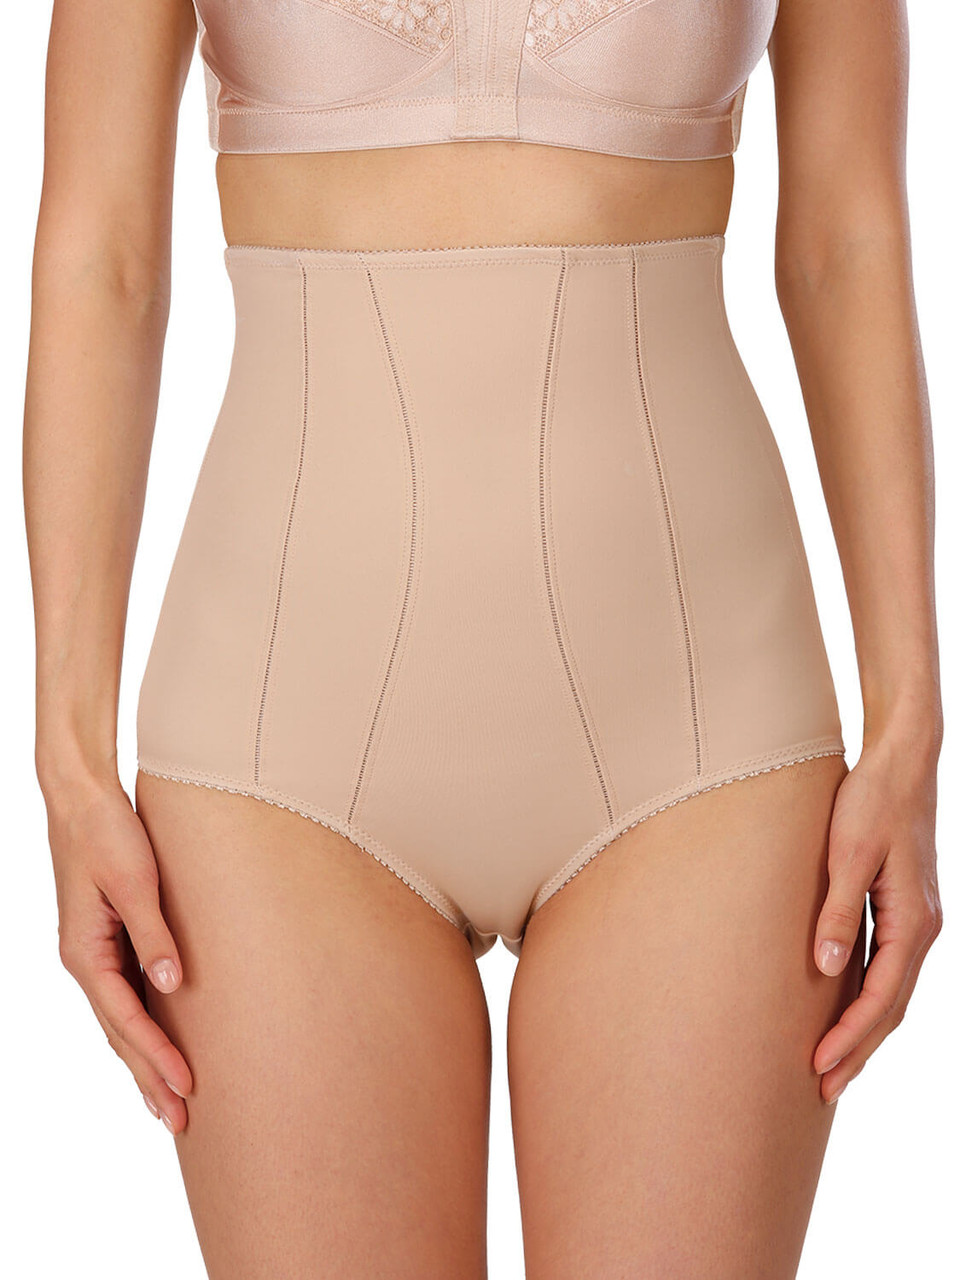 Brands - Naturana - Shapewear - Bodyshapers and Girdles - Les Modes Ancora  Inc. Now That's Lingerie.ca